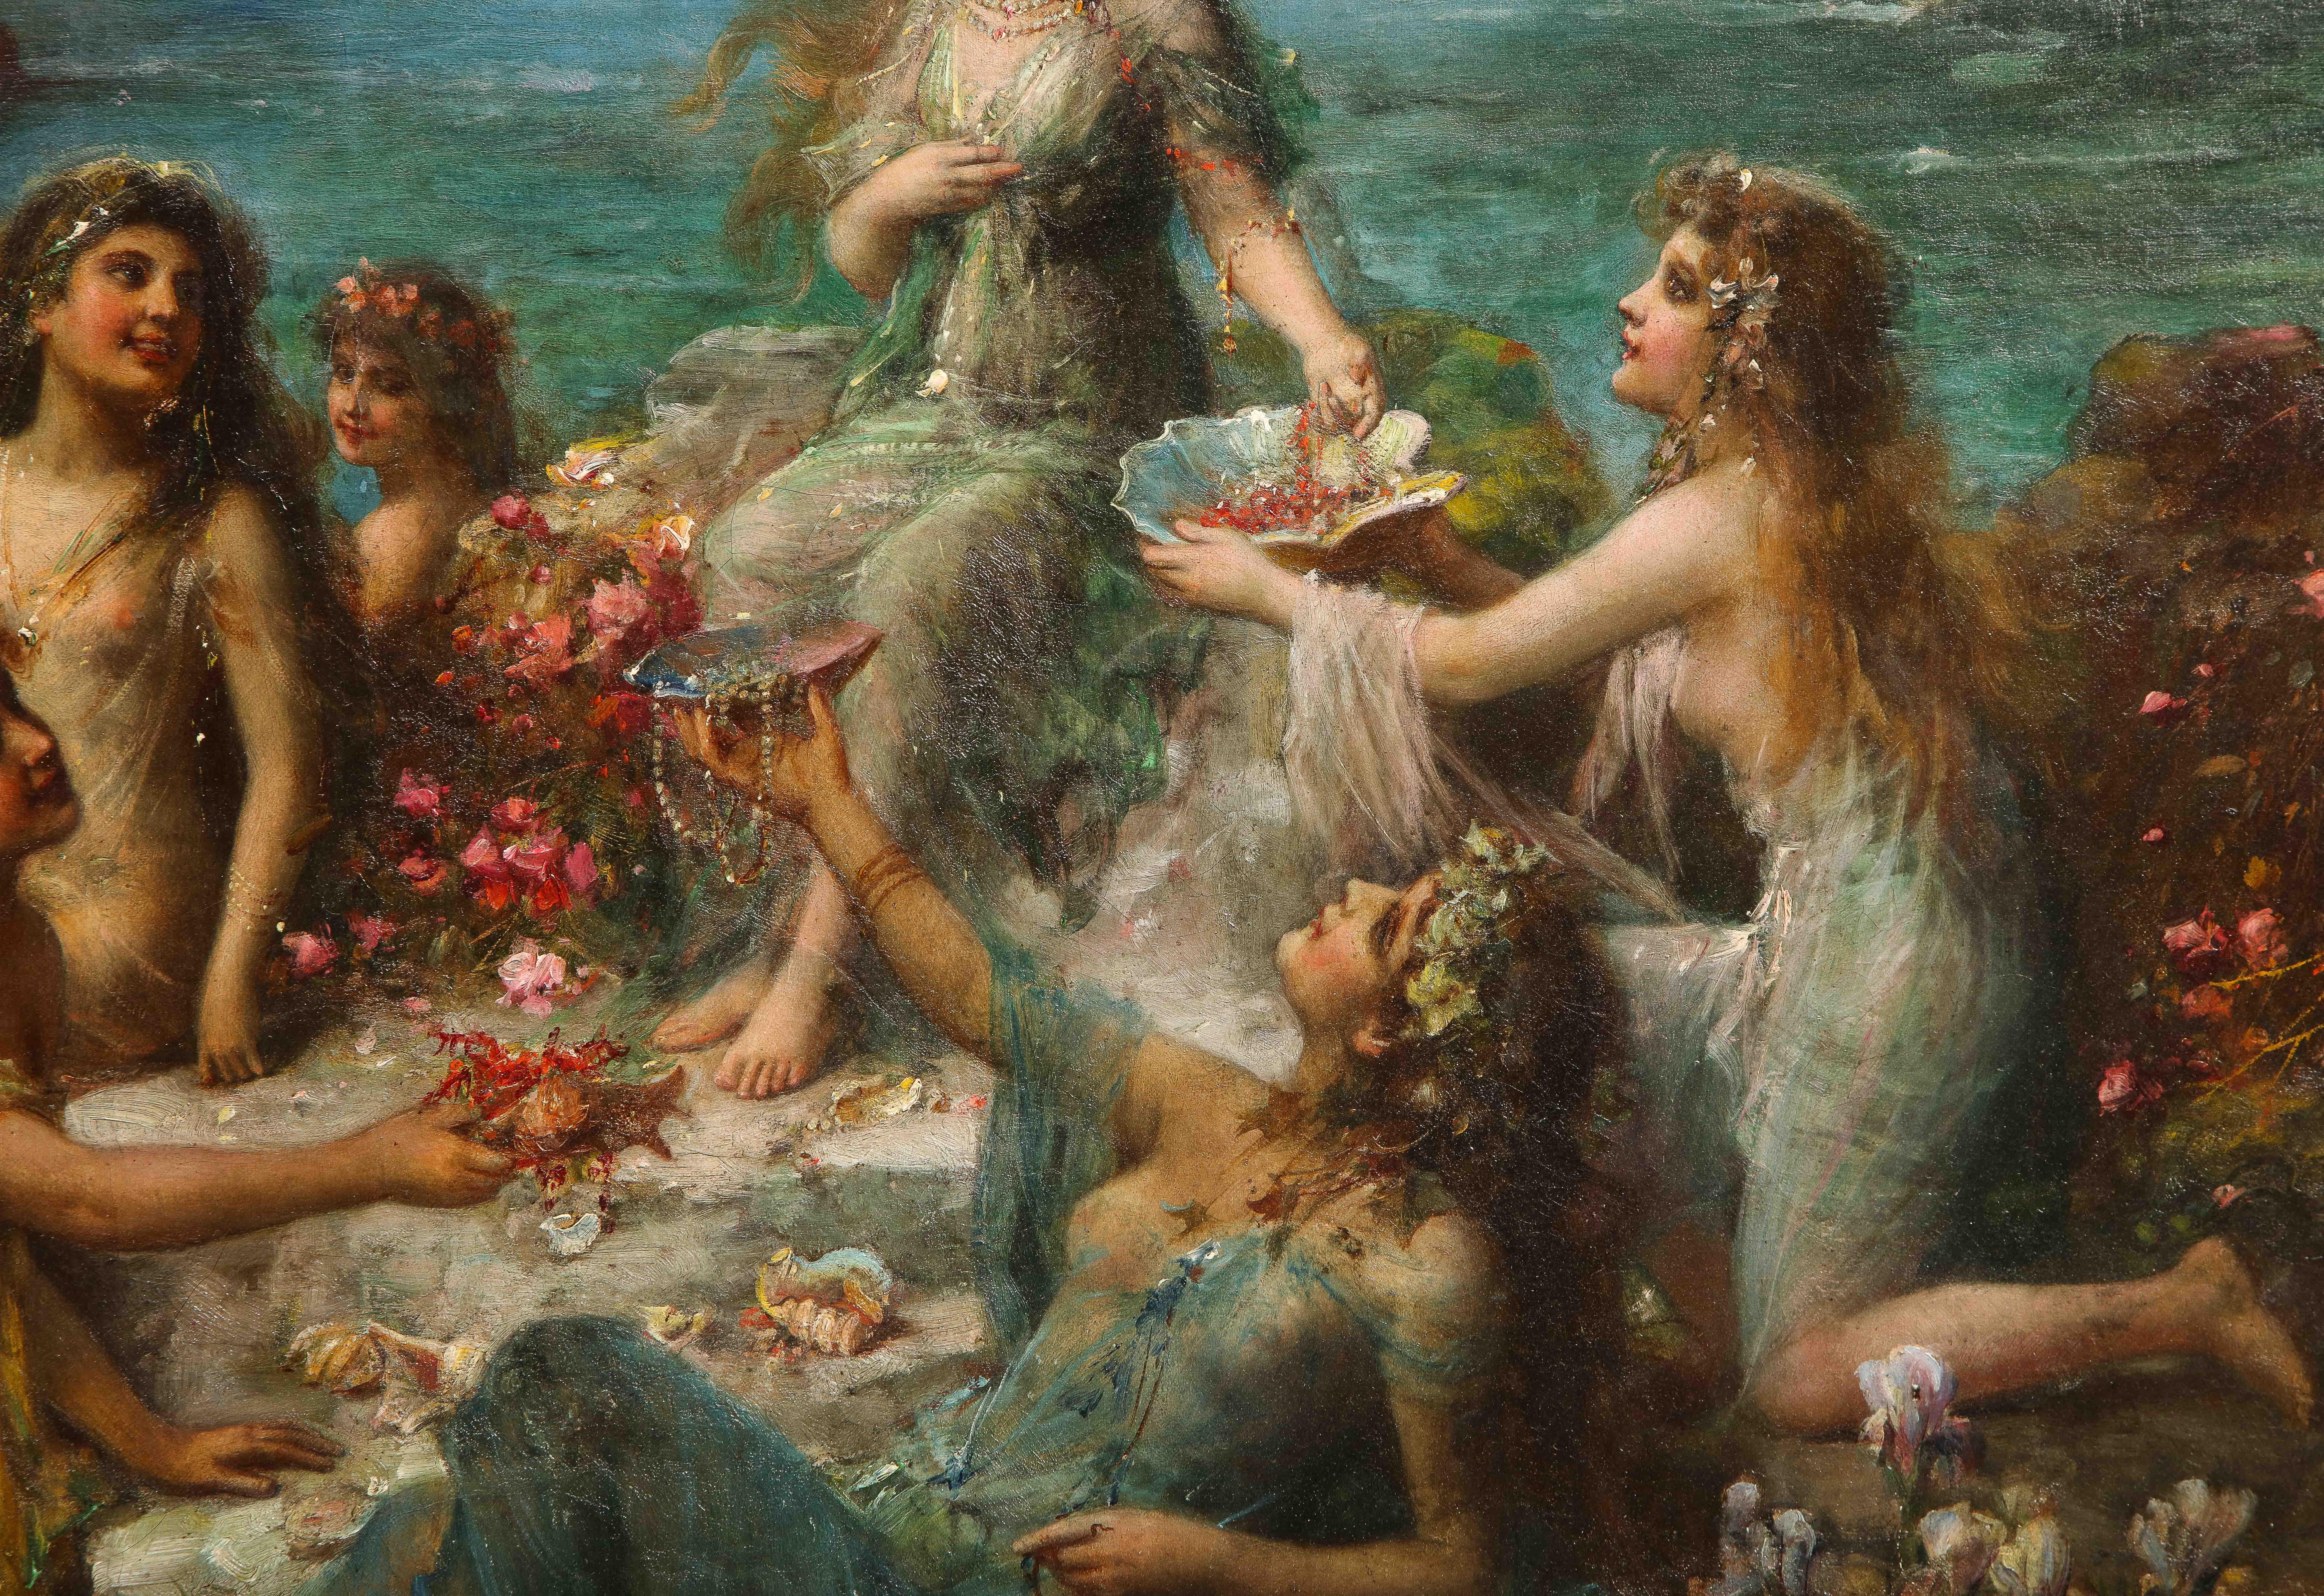 Emanuel Oberhauser “Mermaids and Nymphs” An Exceptional Oil on Canvas Painting For Sale 8